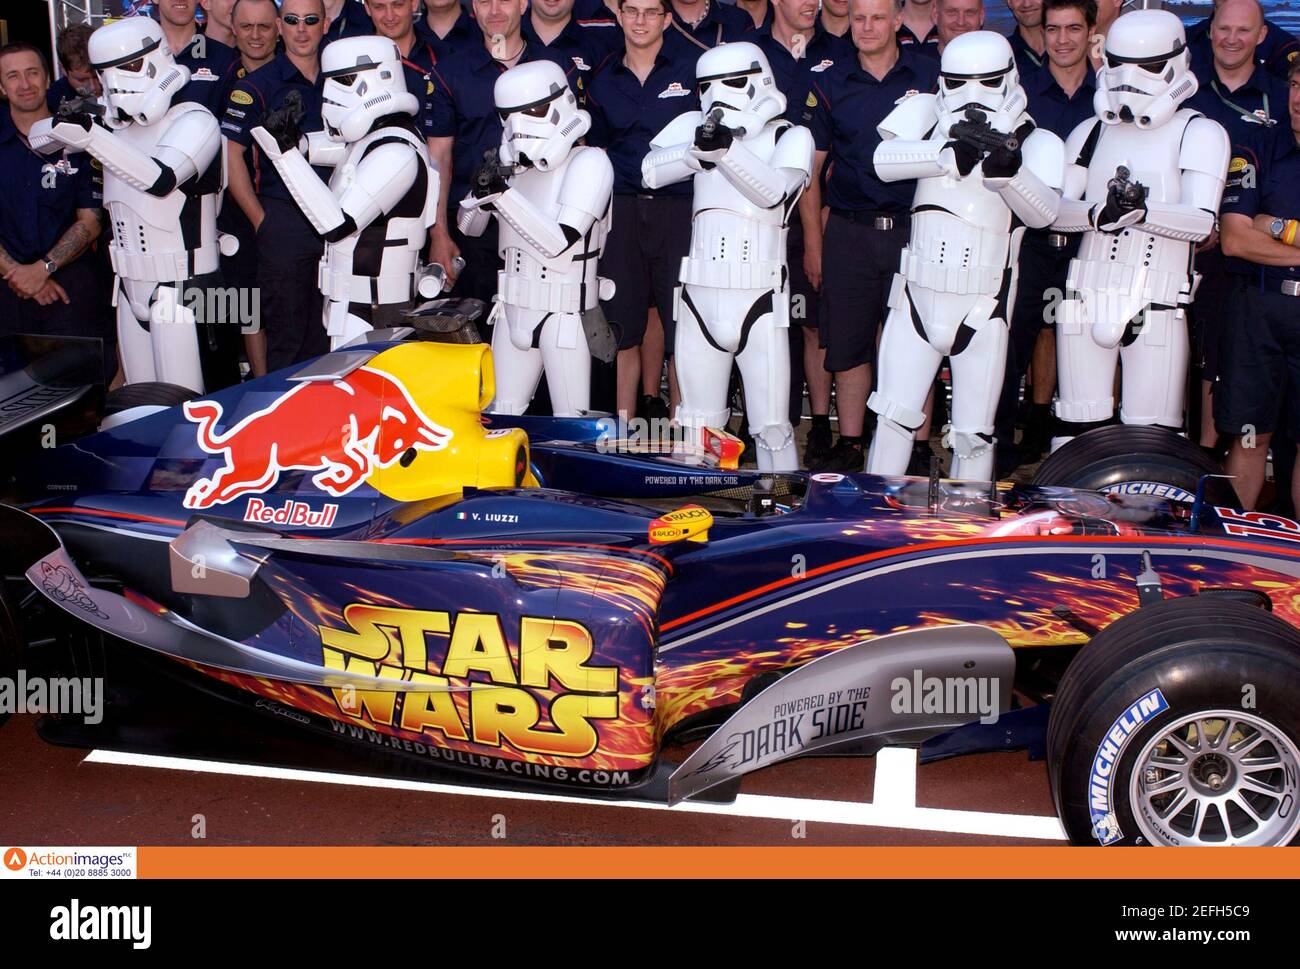 Formula One - F1 - Monaco Grand Prix 2005 - Monte Carlo - 20/5/05  Stormtroopers from the film Star Wars with the Red Bull Formula 1 car  Mandatory Credit: Action Images / Crispin Thruston Livepic Stock Photo -  Alamy